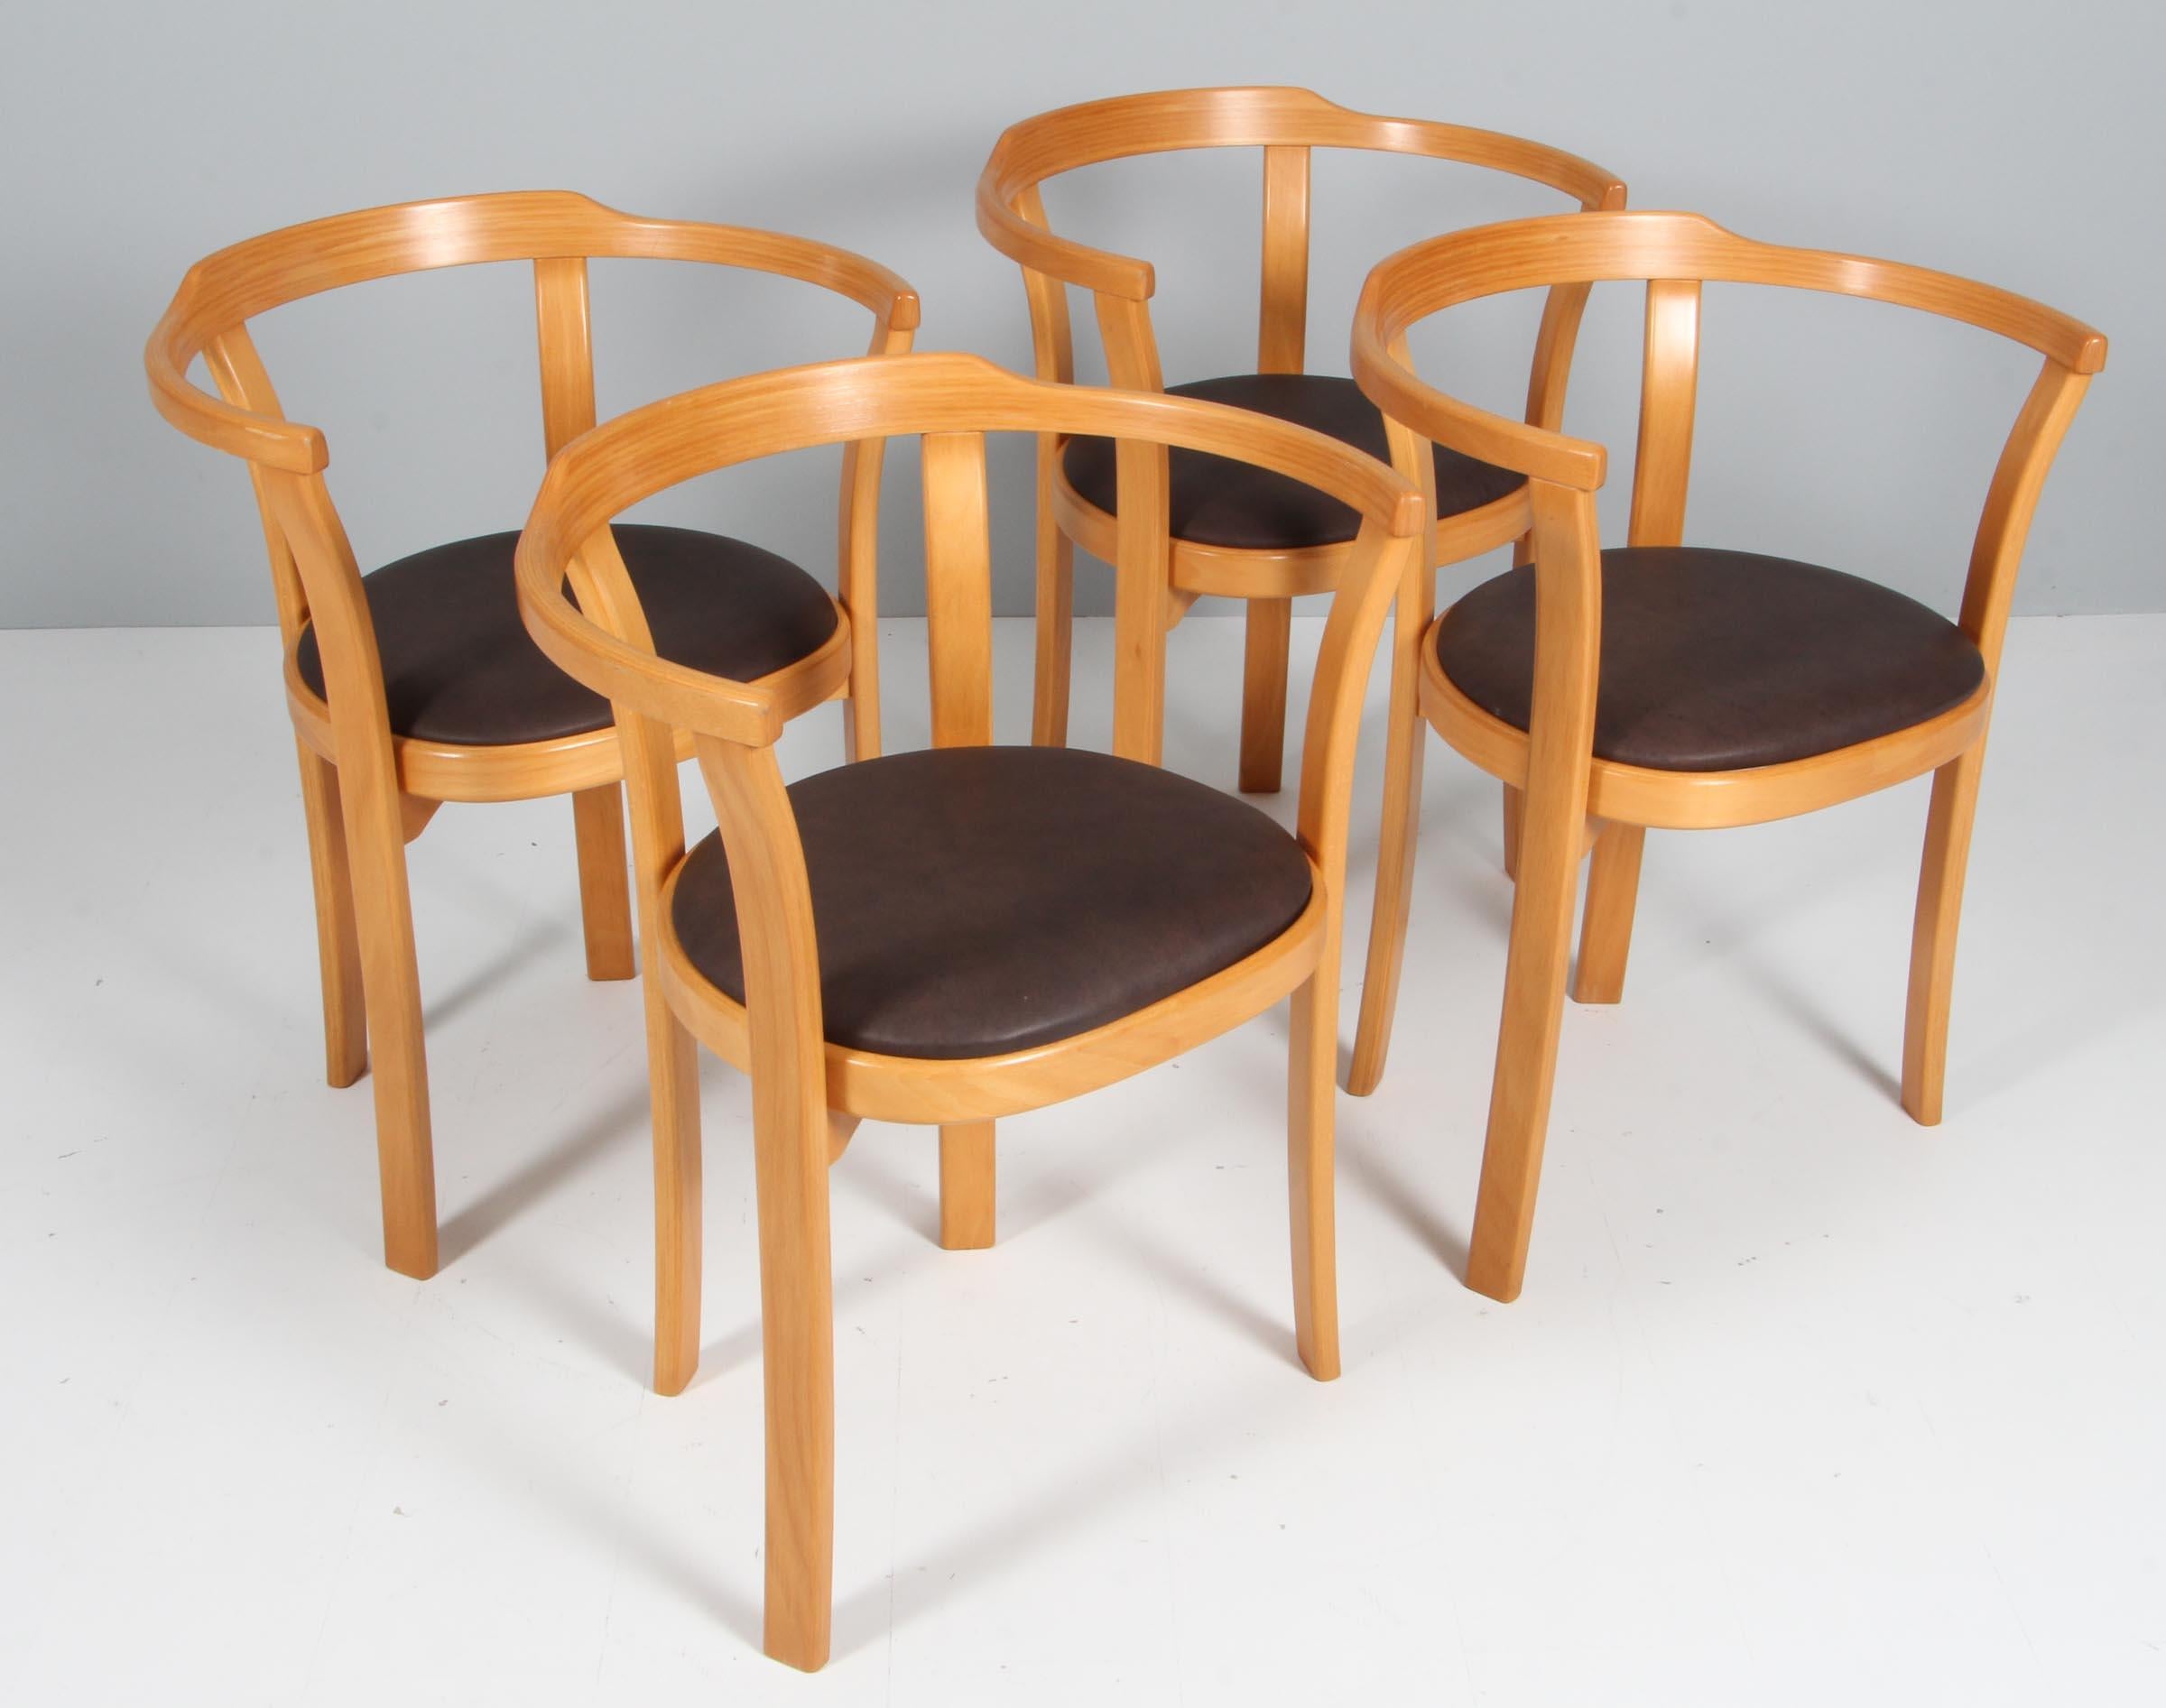 Farstrup set of four armchairs, lacquered beech

Upholstered with mokka latina leather.

Made by Farstrup.